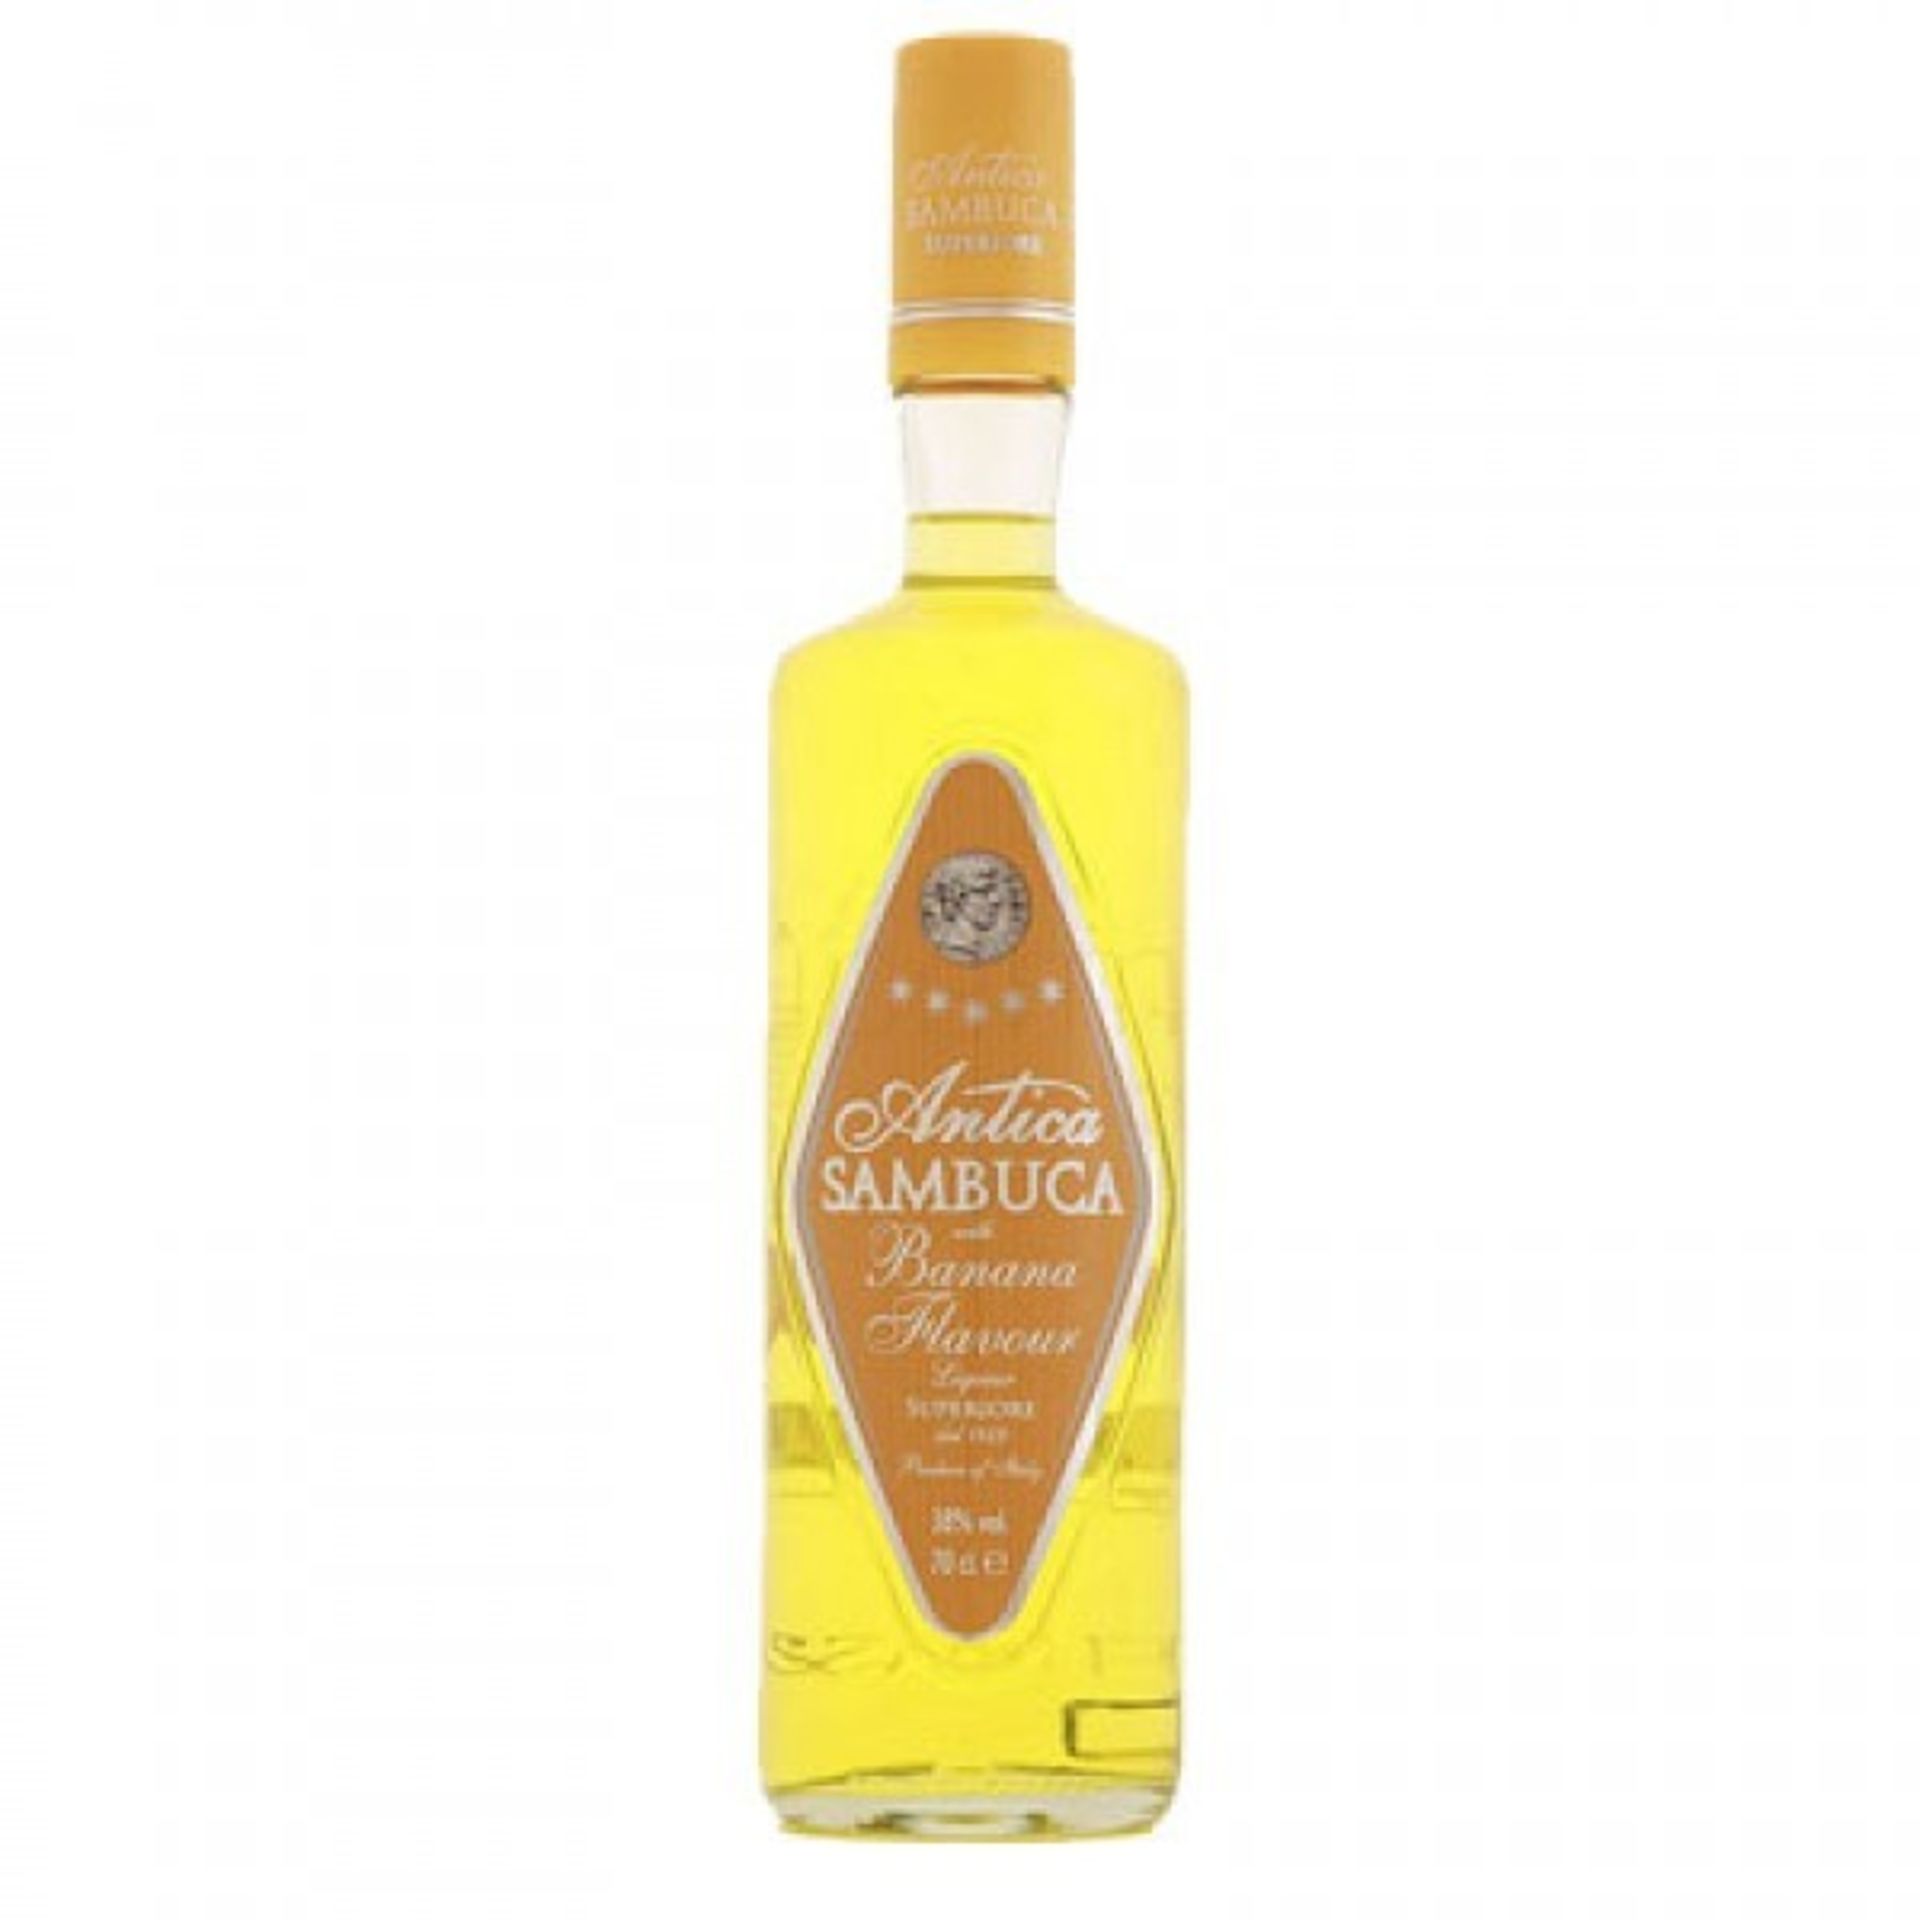 70cl Bottle of Antica Sambuca with Banana Flavour Liqueur, new